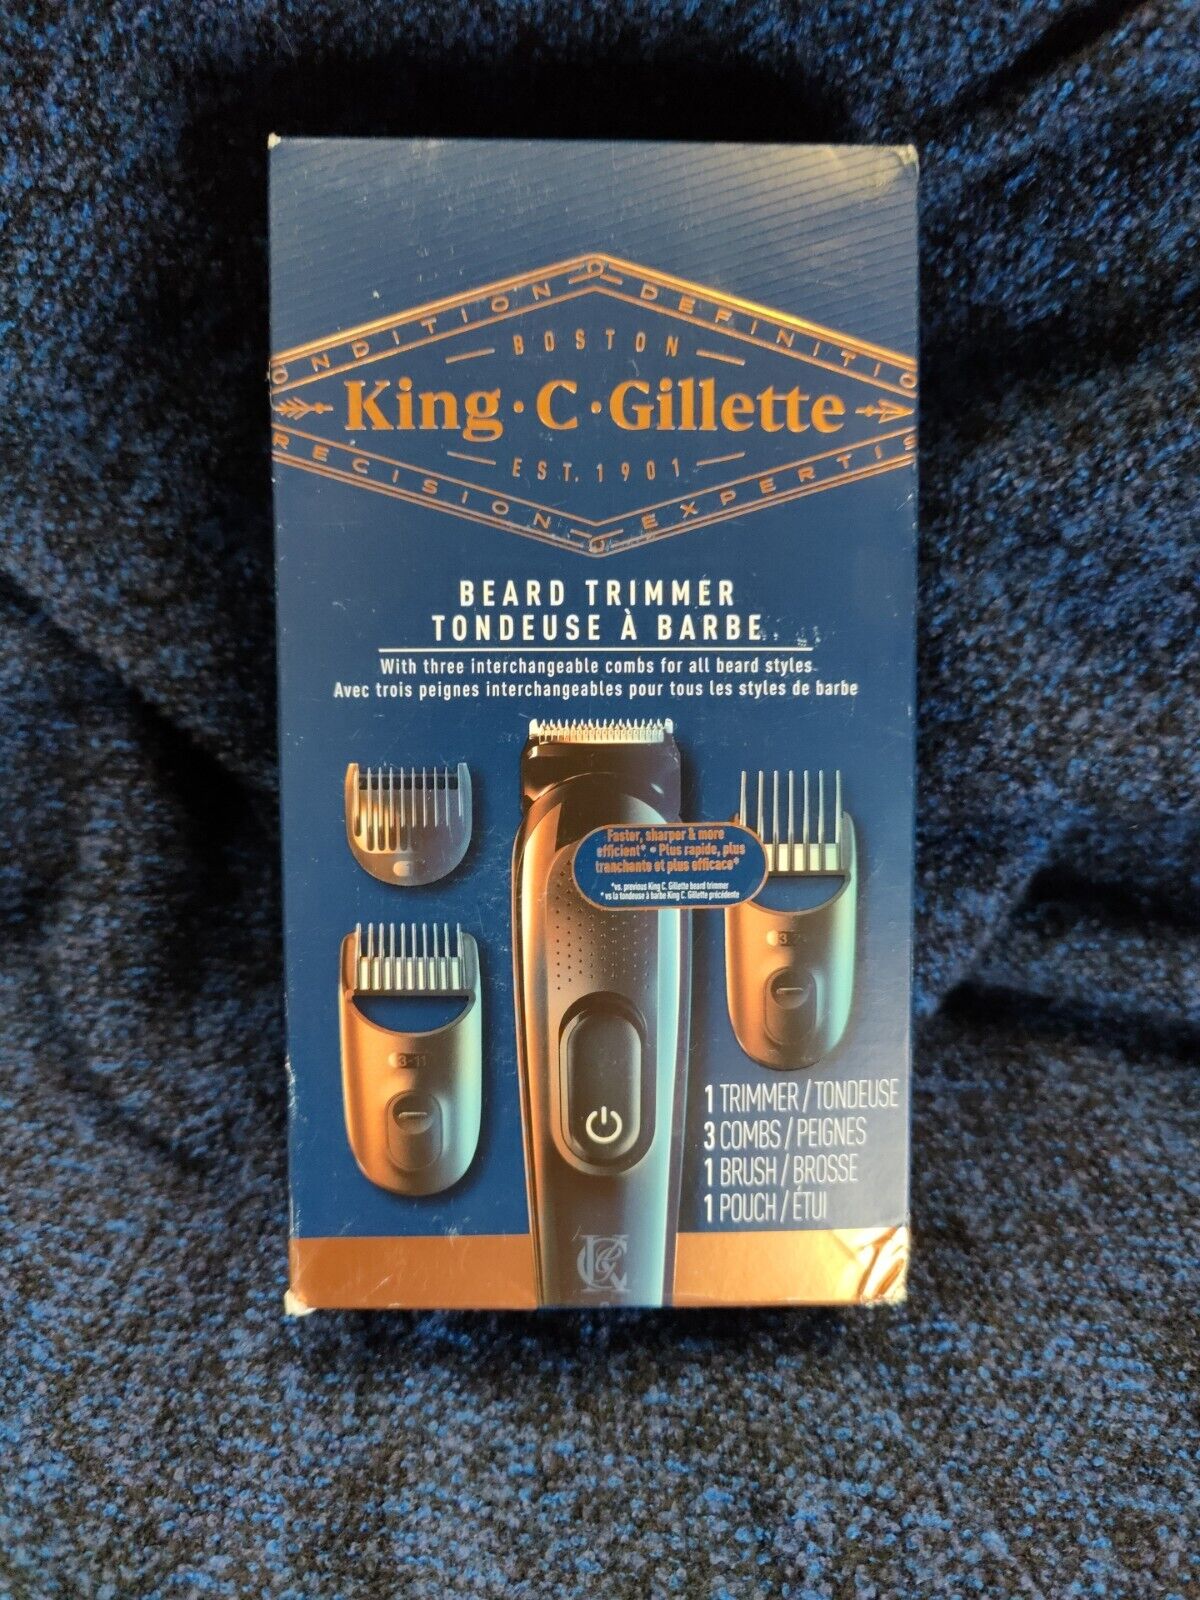 King C. Gillette Cordless Beard Trimmer includes 1 Trimmer, 3 Combs, New in box